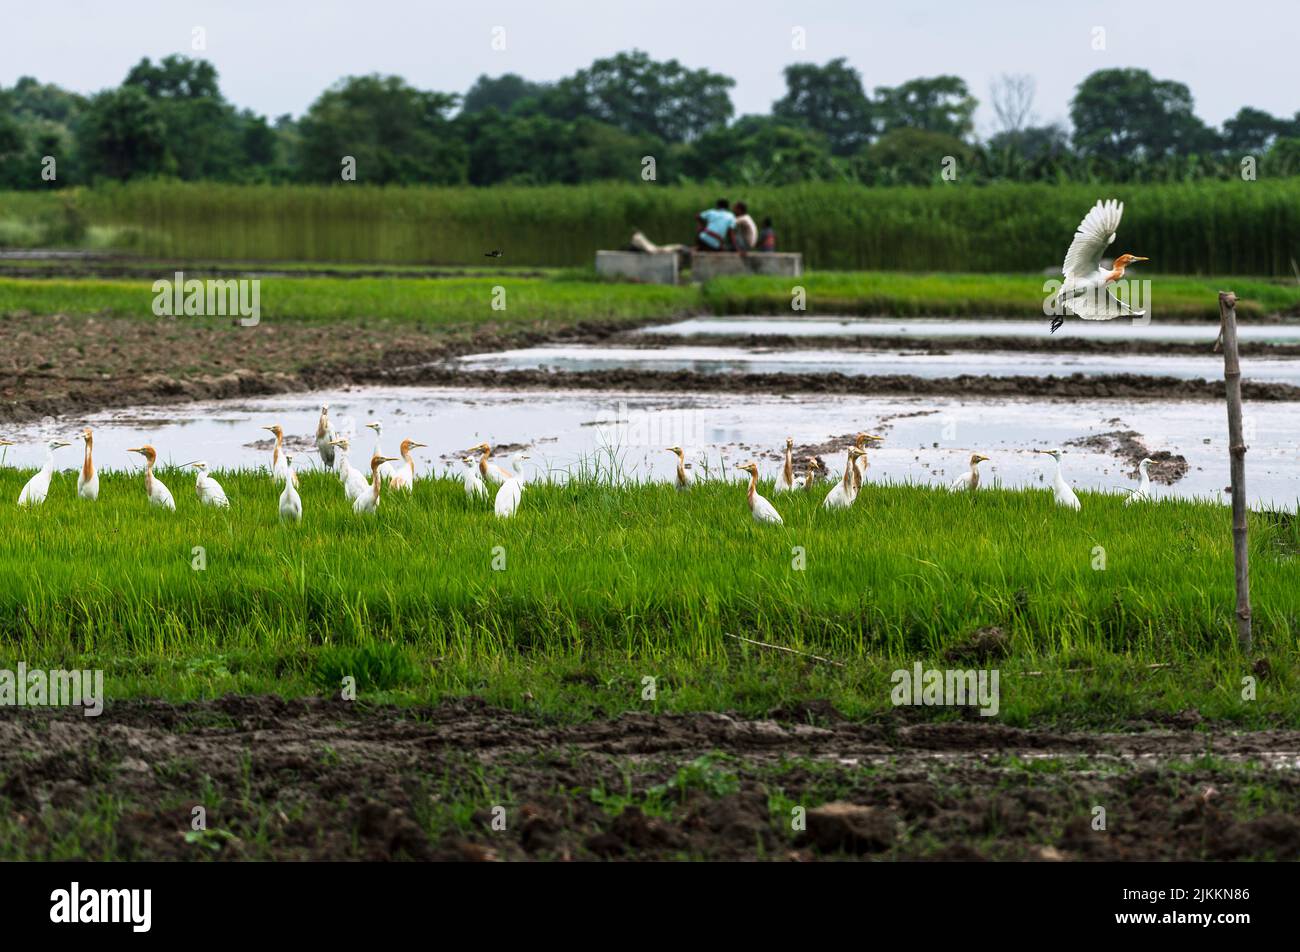 A flock of wild cattle egret (Bubulcus ibis) birds fly and sit on the agricultural field to eat insects that emerge from the soil during plowing. Some of the cattle egrets have orange-brown feathers breeding plumage. Jhinuk Ghata, West Bengal, India. Stock Photo